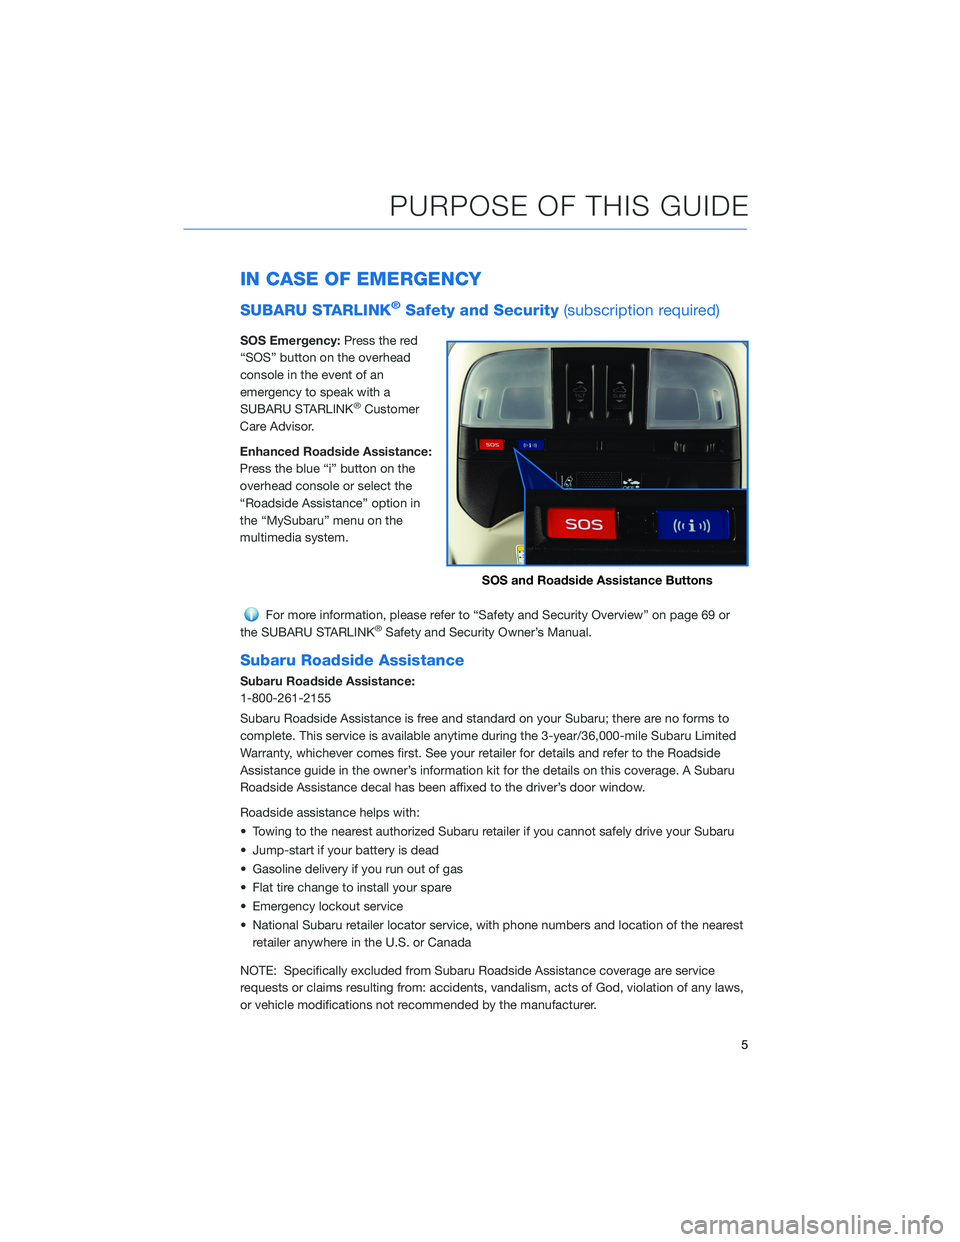 SUBARU CROSSTREK 2021  Getting Started Guide IN CASE OF EMERGENCY
SUBARU STARLINK®Safety and Security(subscription required)
SOS Emergency:Press the red
“SOS” button on the overhead
console in the event of an
emergency to speak with a
SUBAR